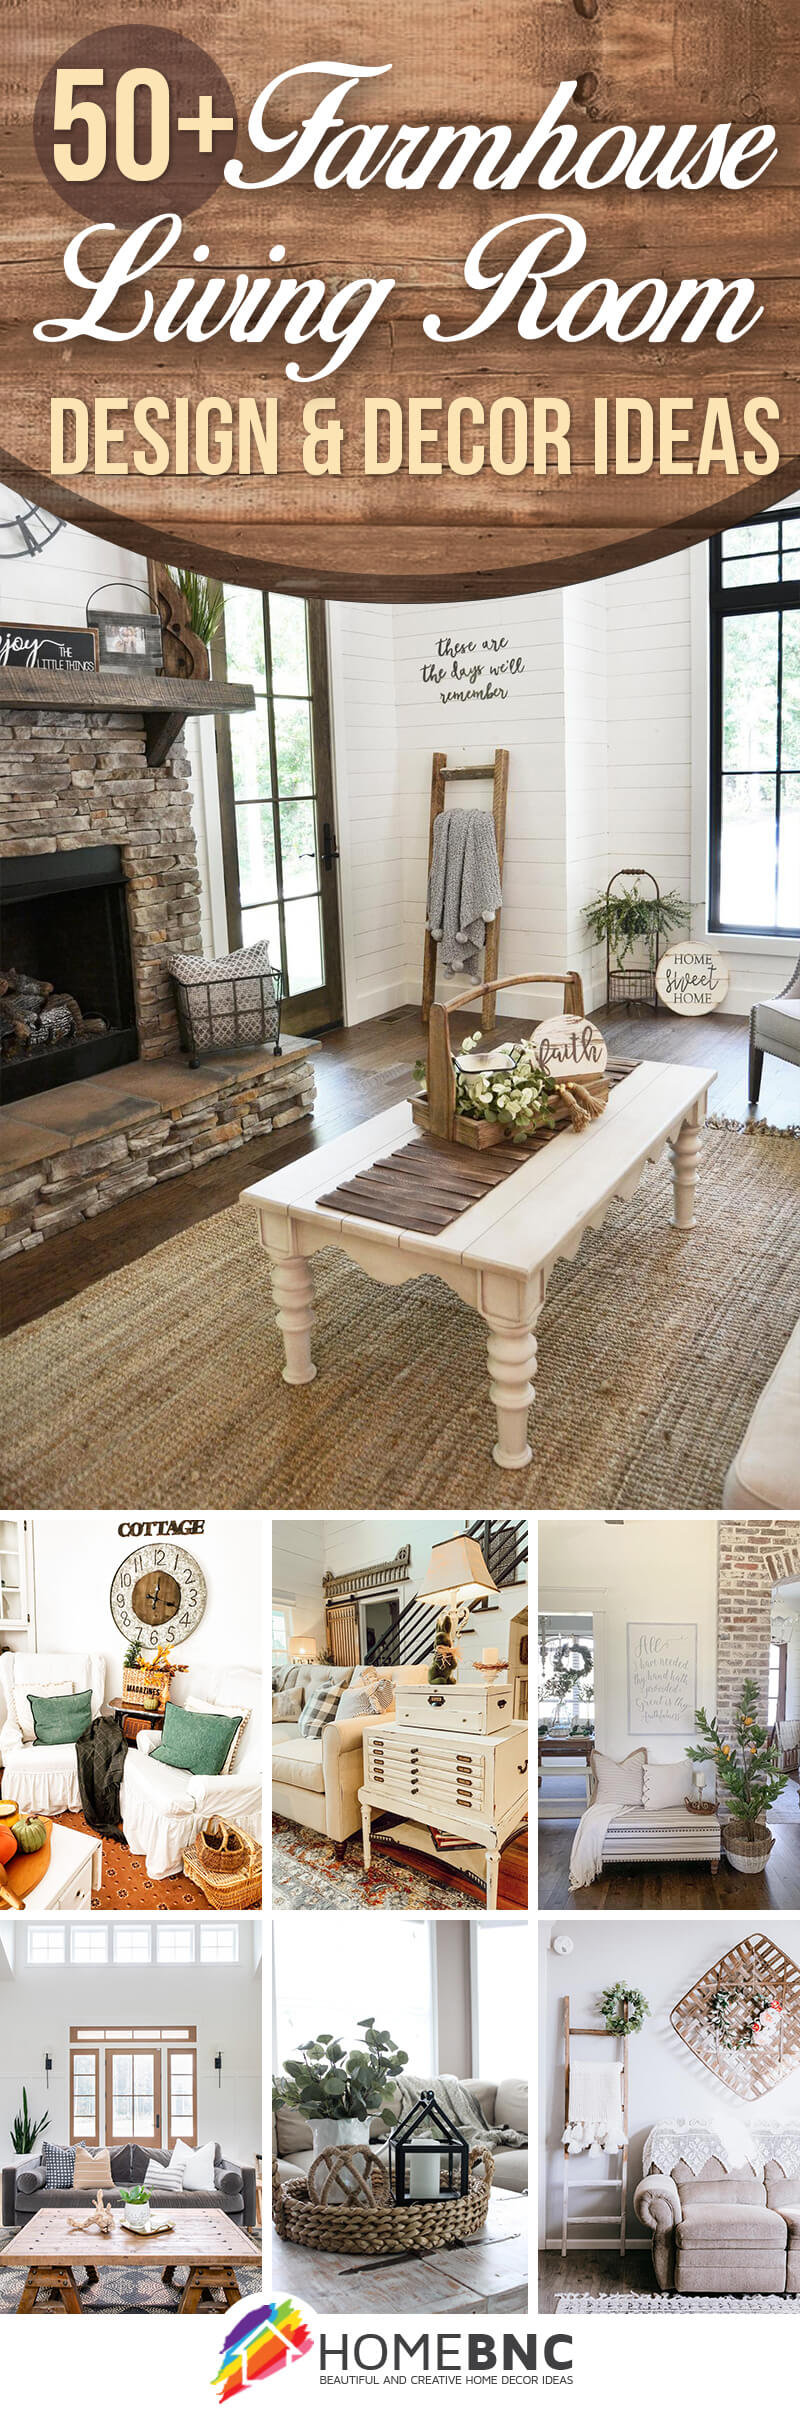 50 Best Farmhouse Living Room Decor Ideas And Designs For 2021 - How To Decorate Your Home Farmhouse Style